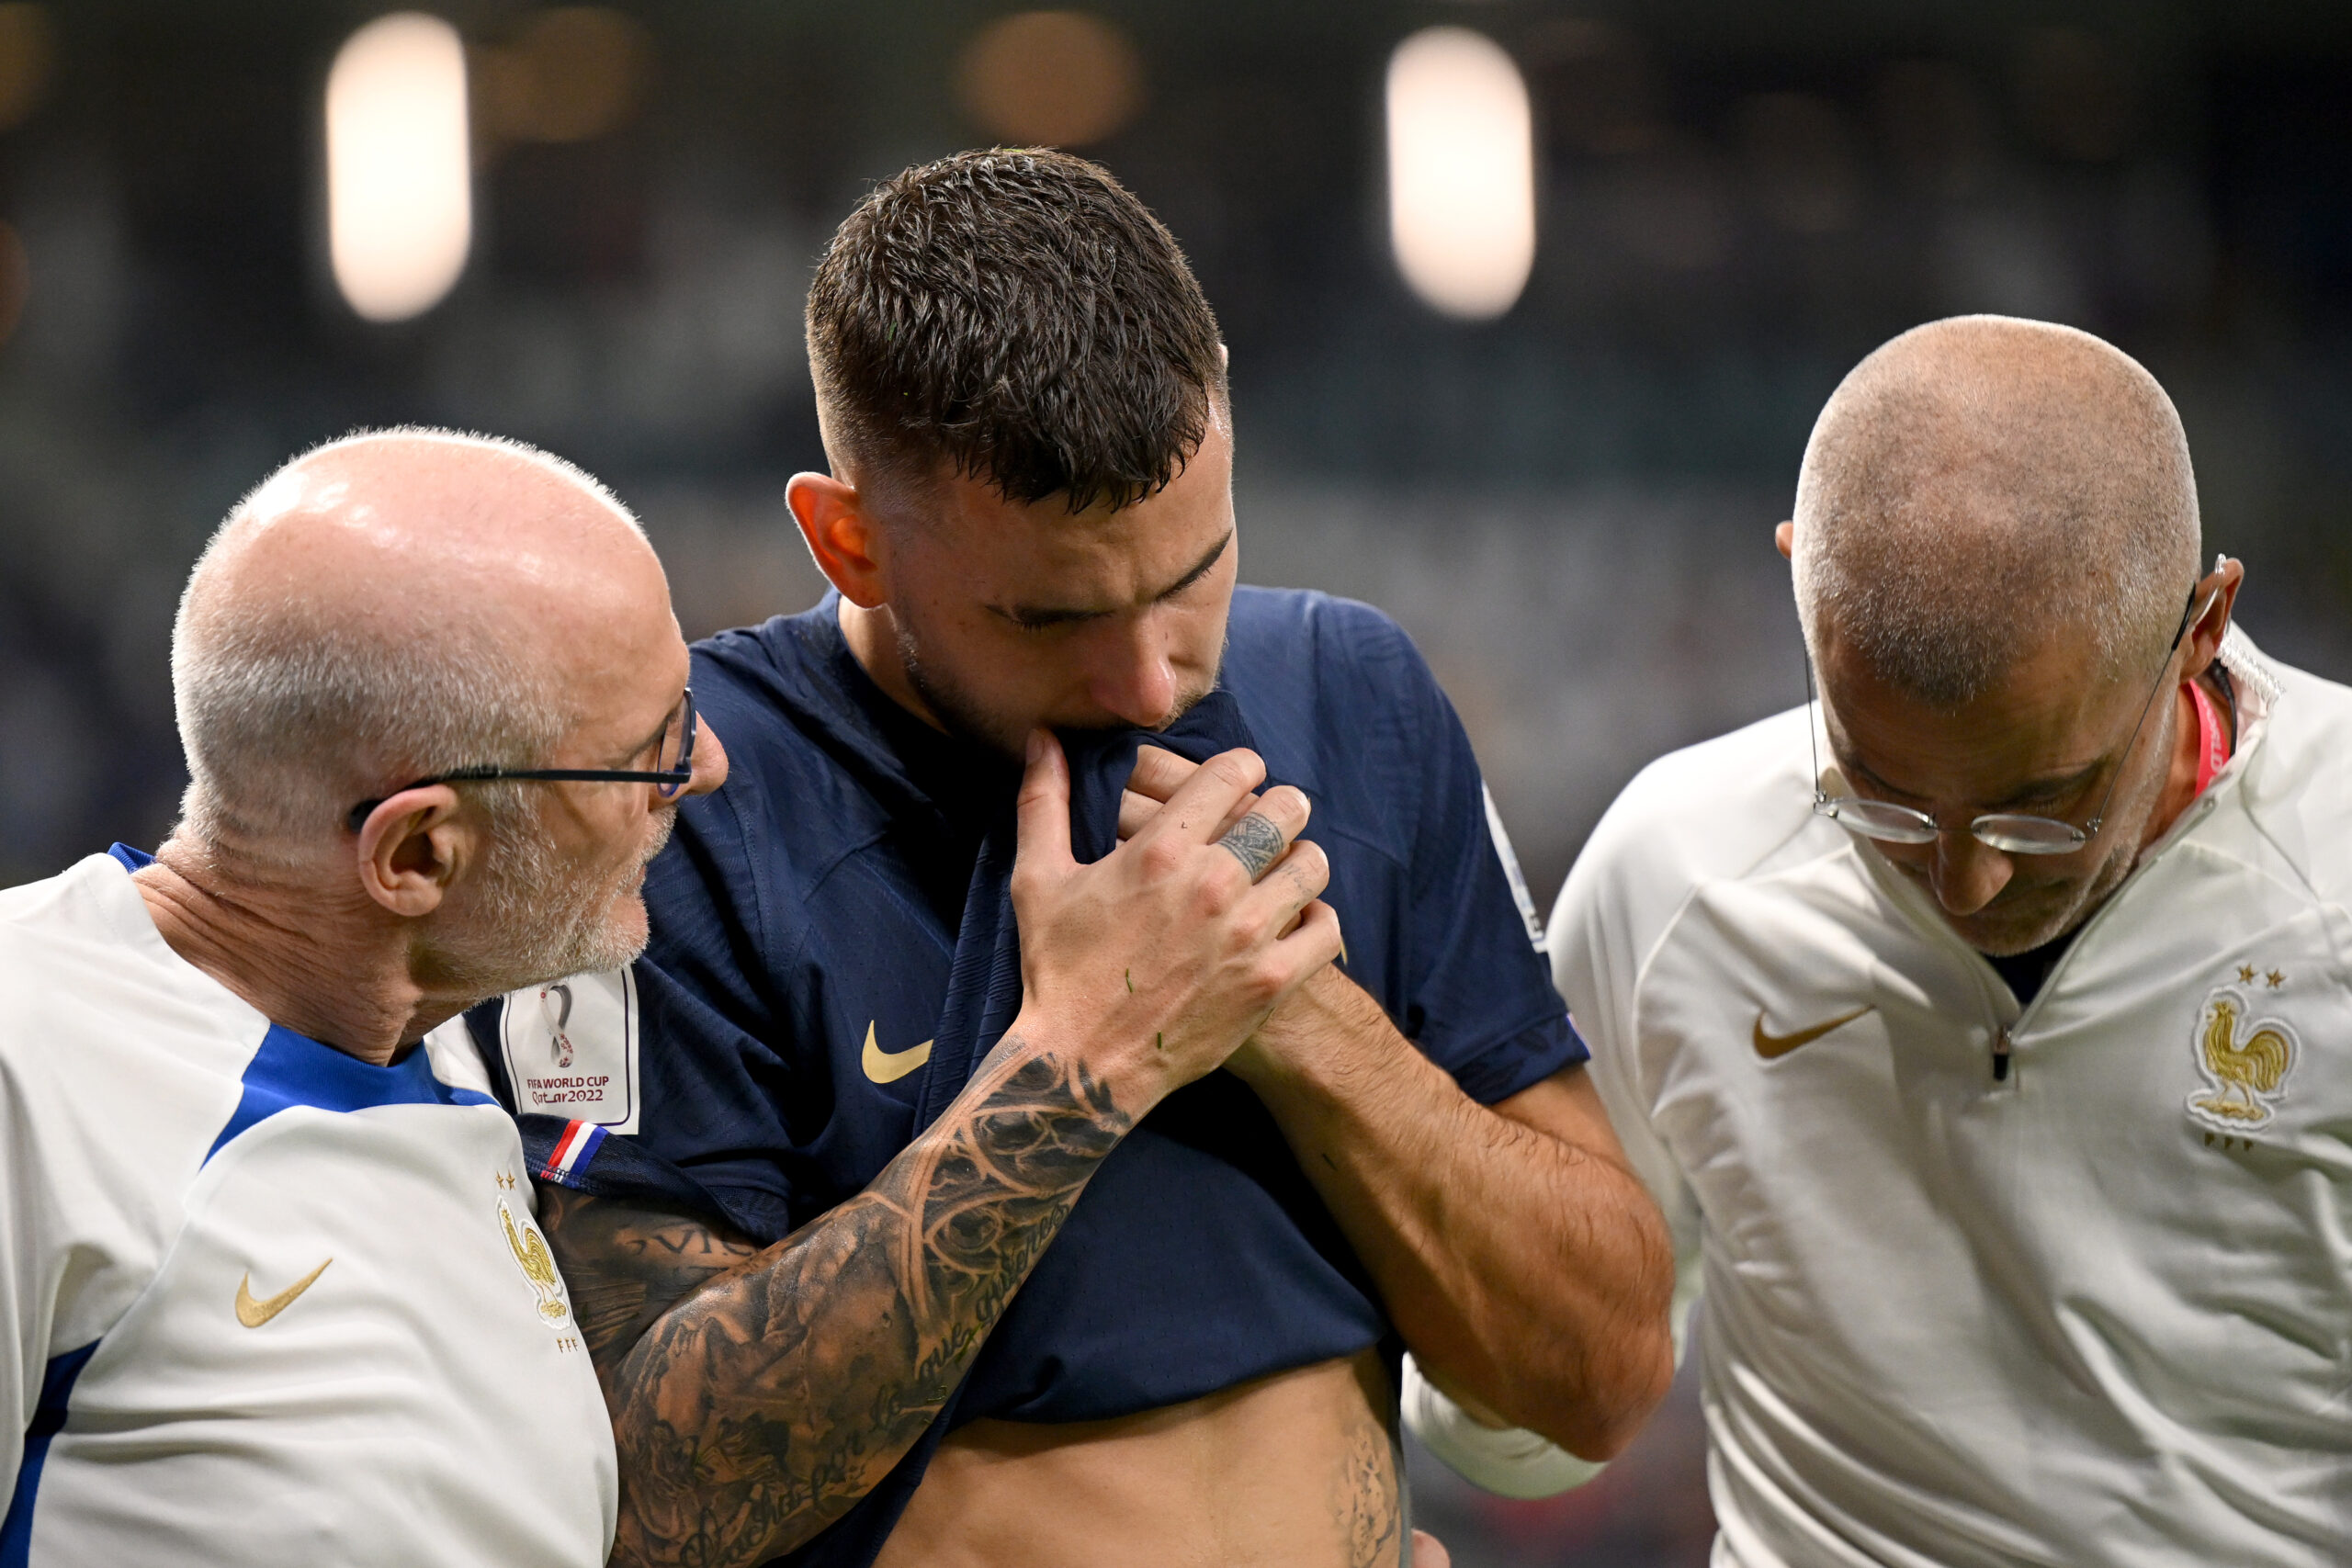 Injury Rules France Defender Lucas Hernandez Out of World Cup